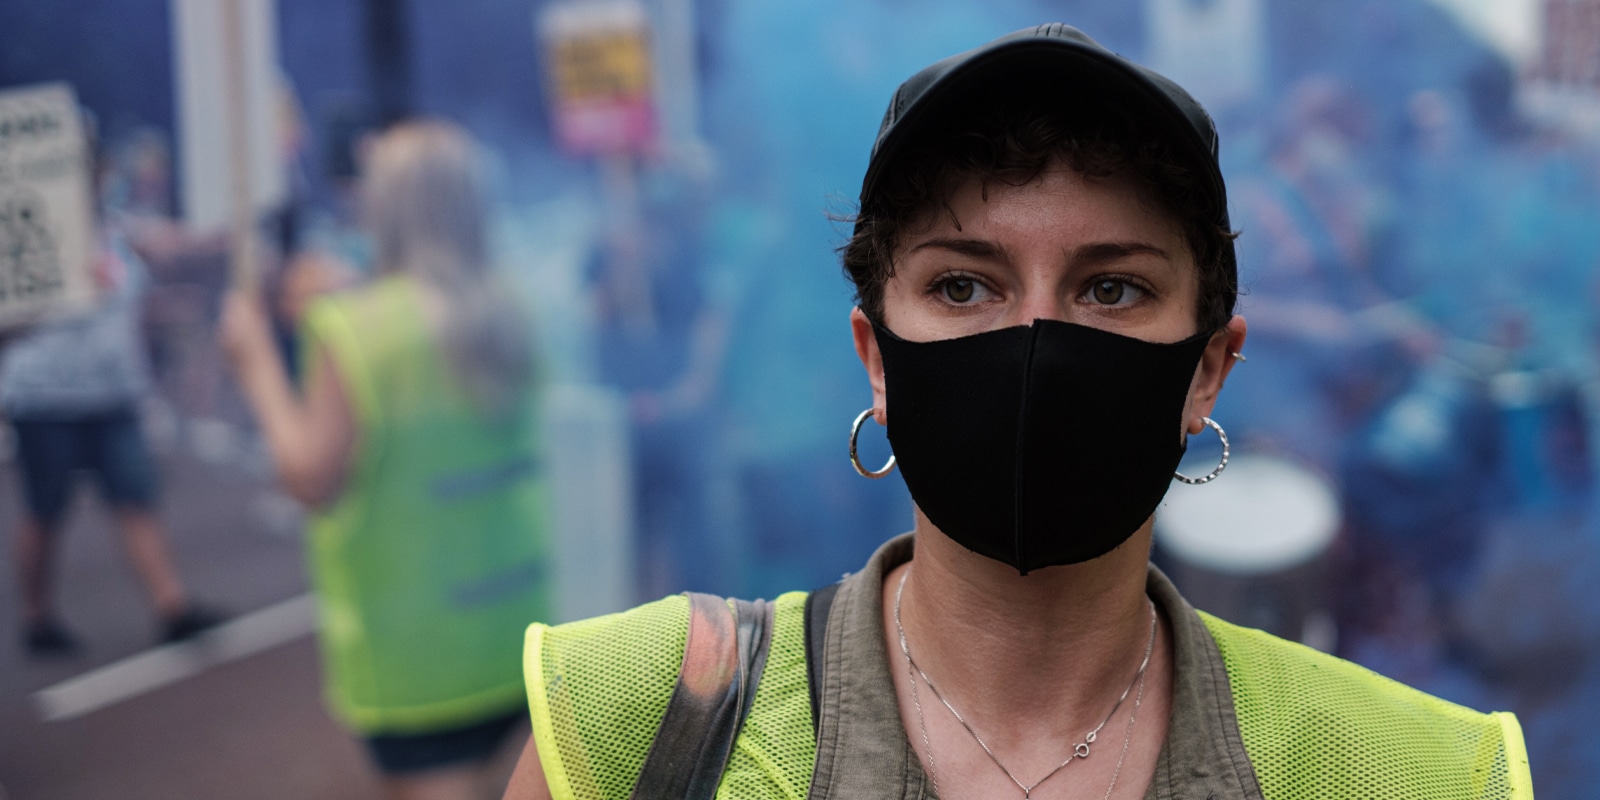 An image of a protest with a woman portrait covering her face with a mask